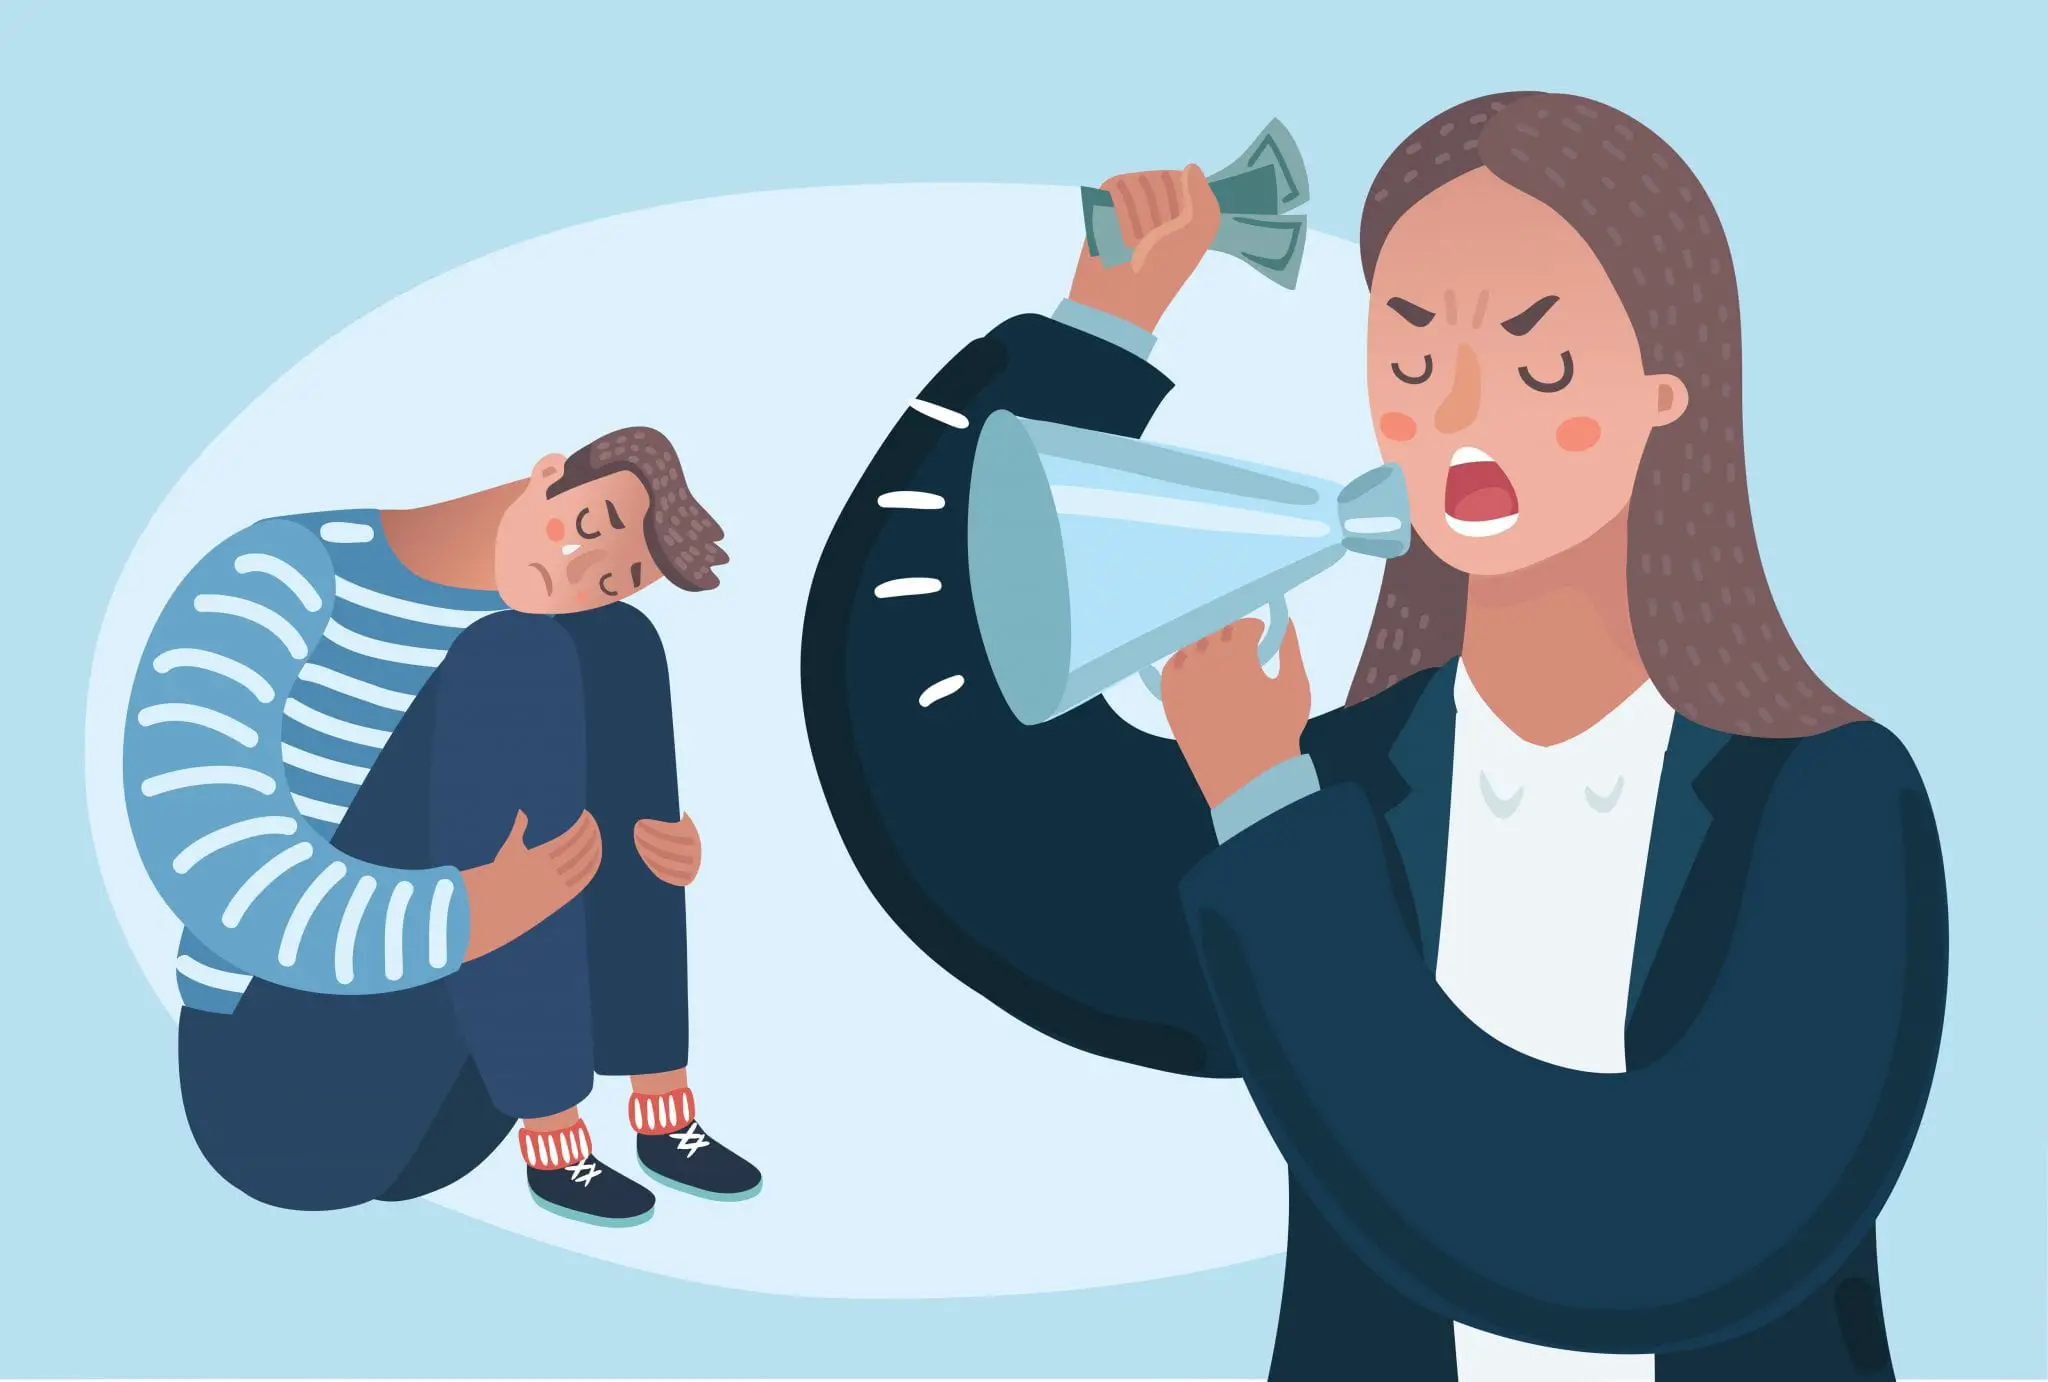 Illustration of Angry Woman Boss Character Yelling Man. Family Problems, Pressure at Work, Psychological Abuse